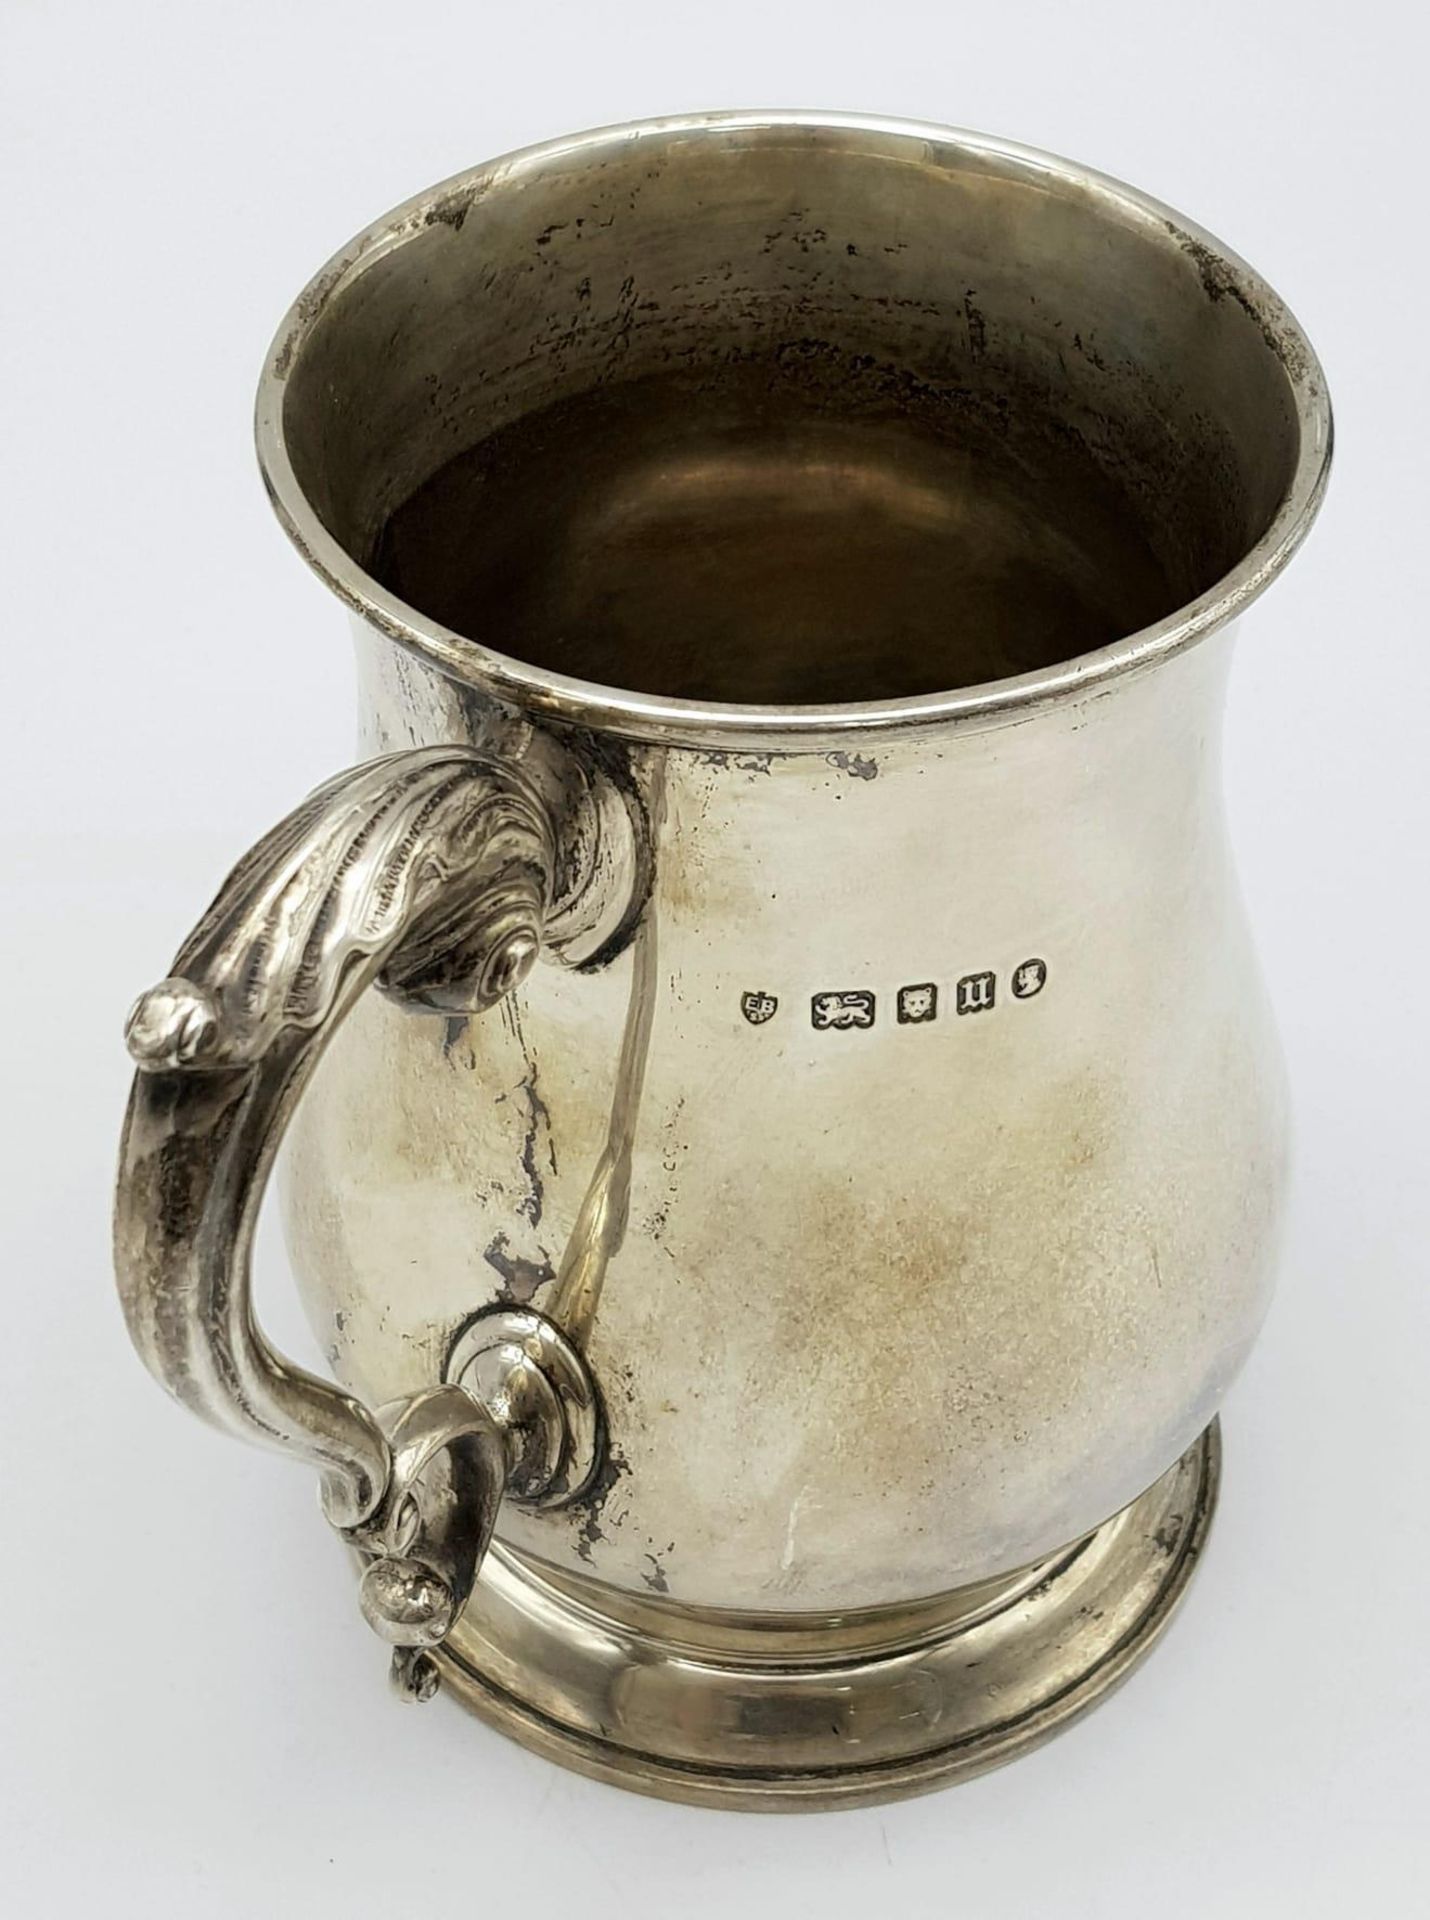 A Sterling Silver Tankard Given to the Thrusters! Hourglass design with an ornate handle. - Image 6 of 14